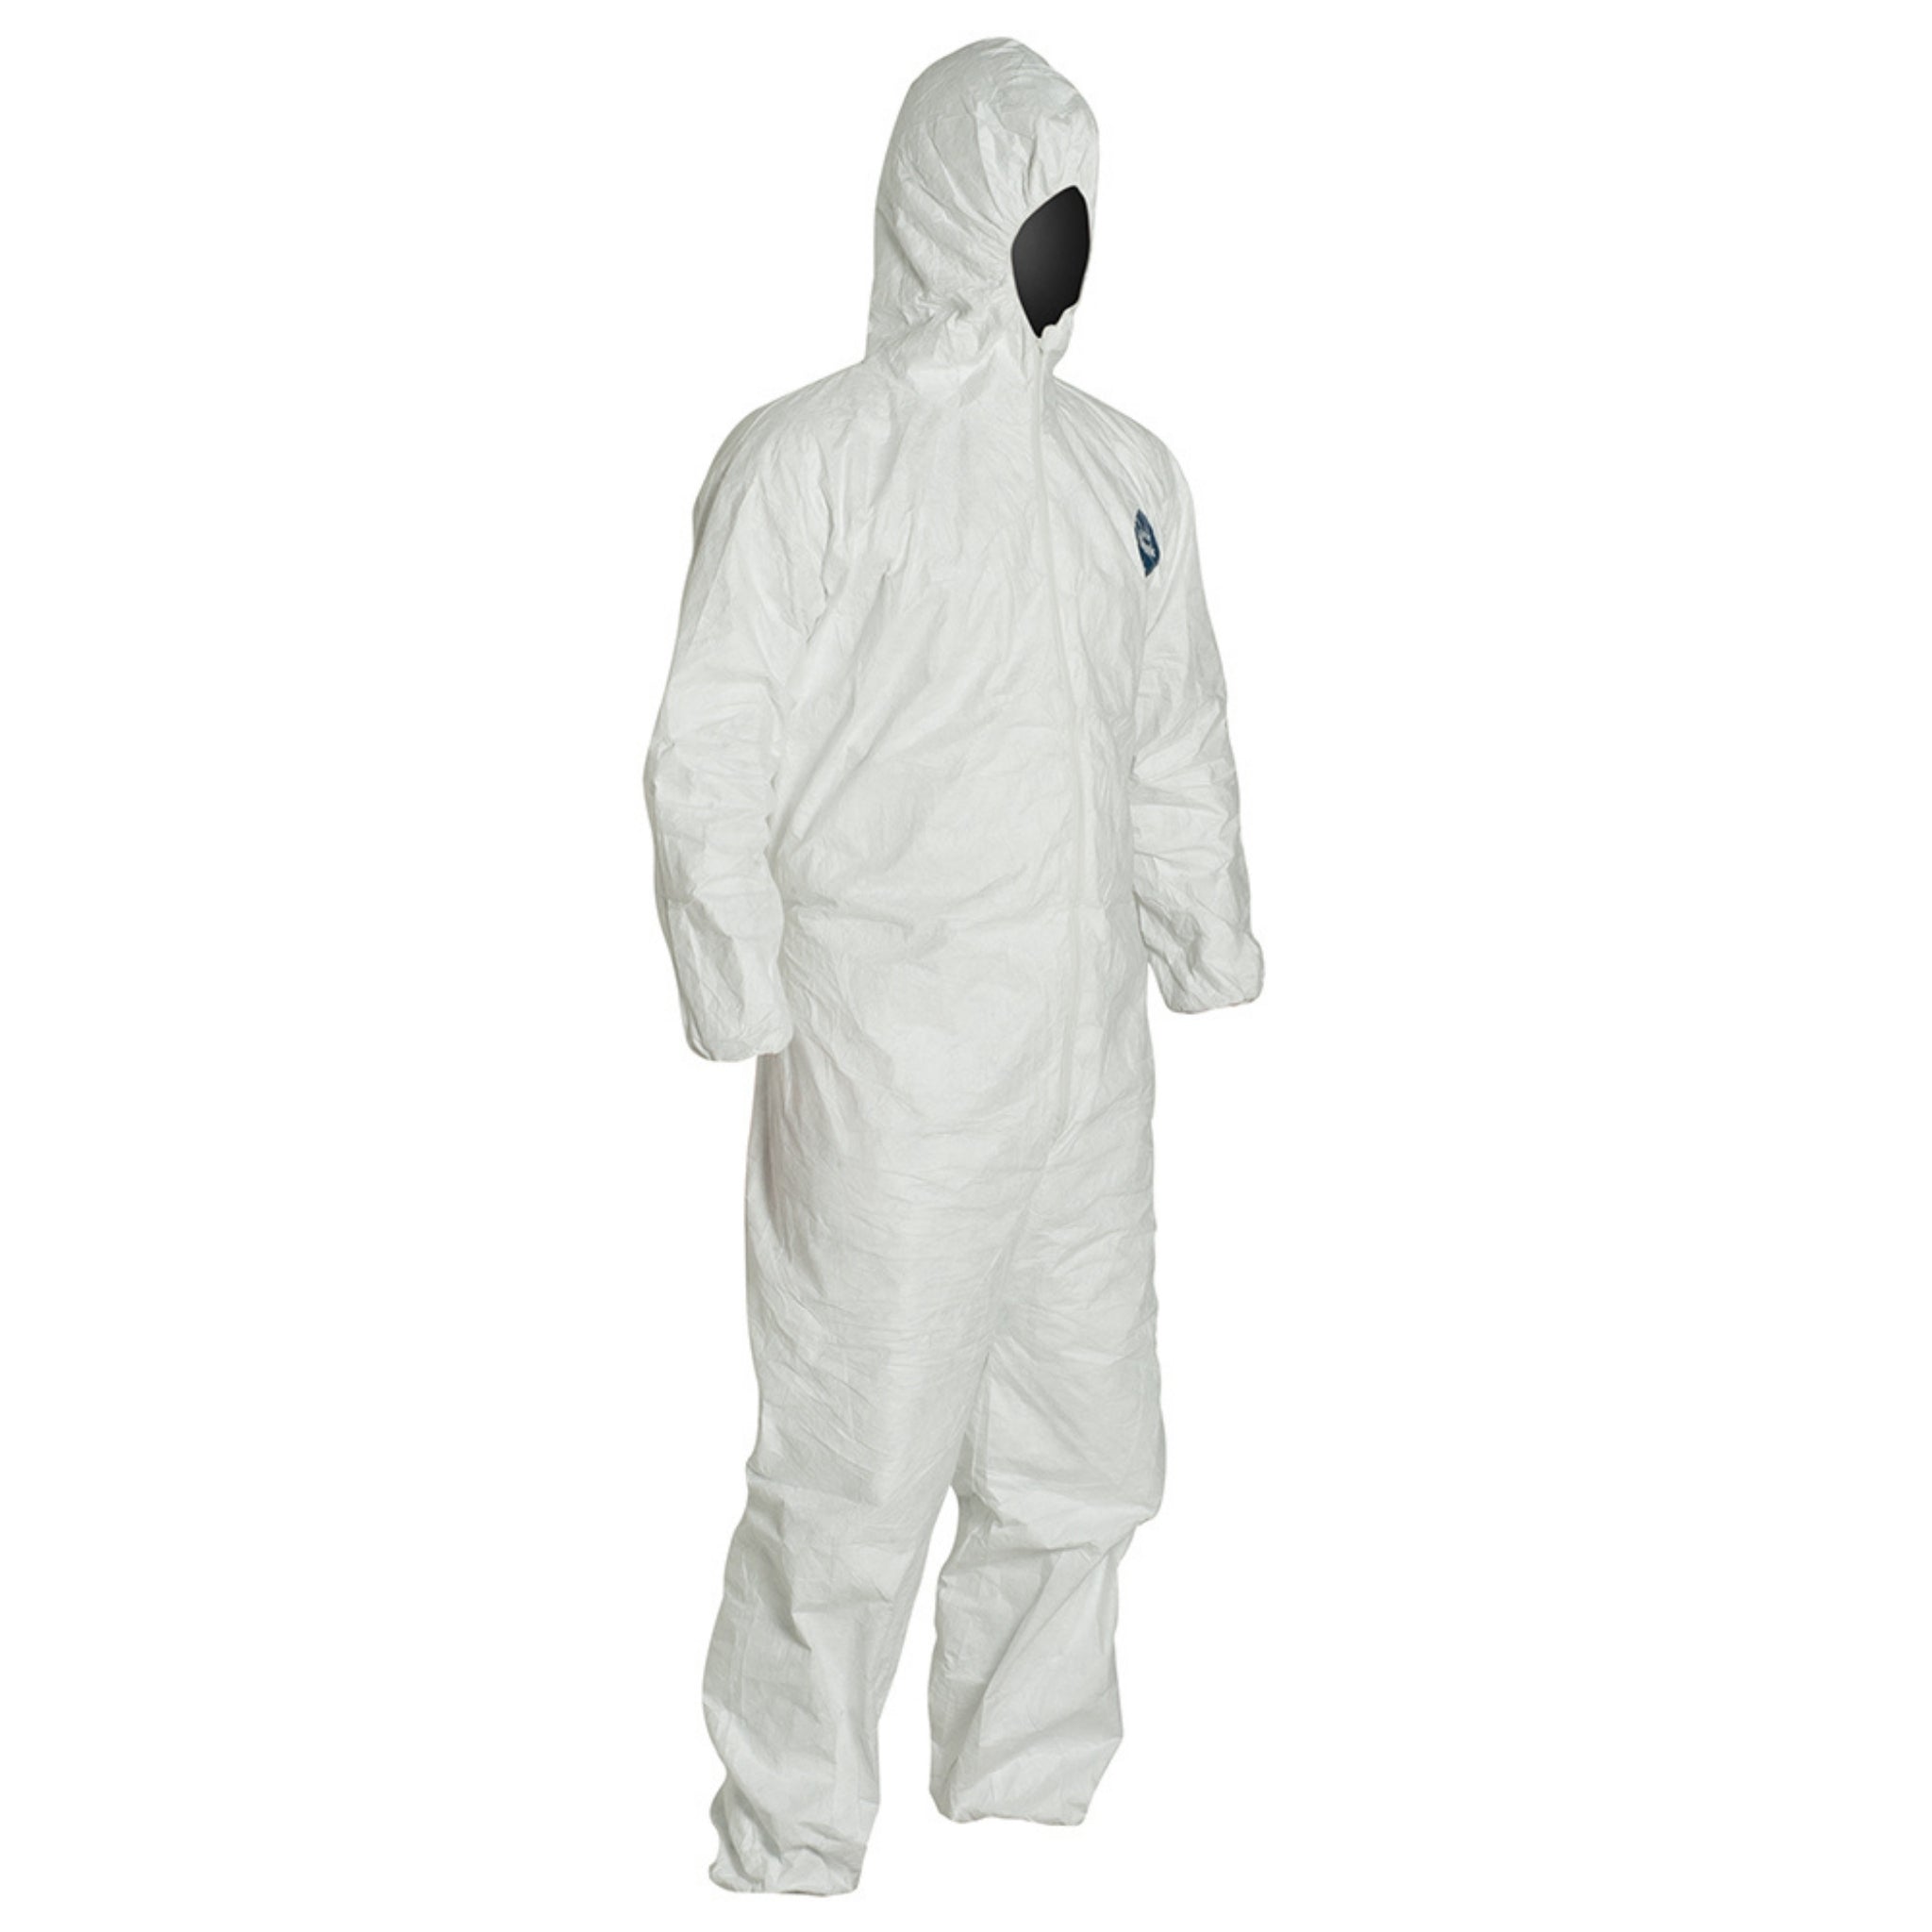 DuPont TY127S- Case of 25: Tyvek 400 Disposable Protective Coverall, White